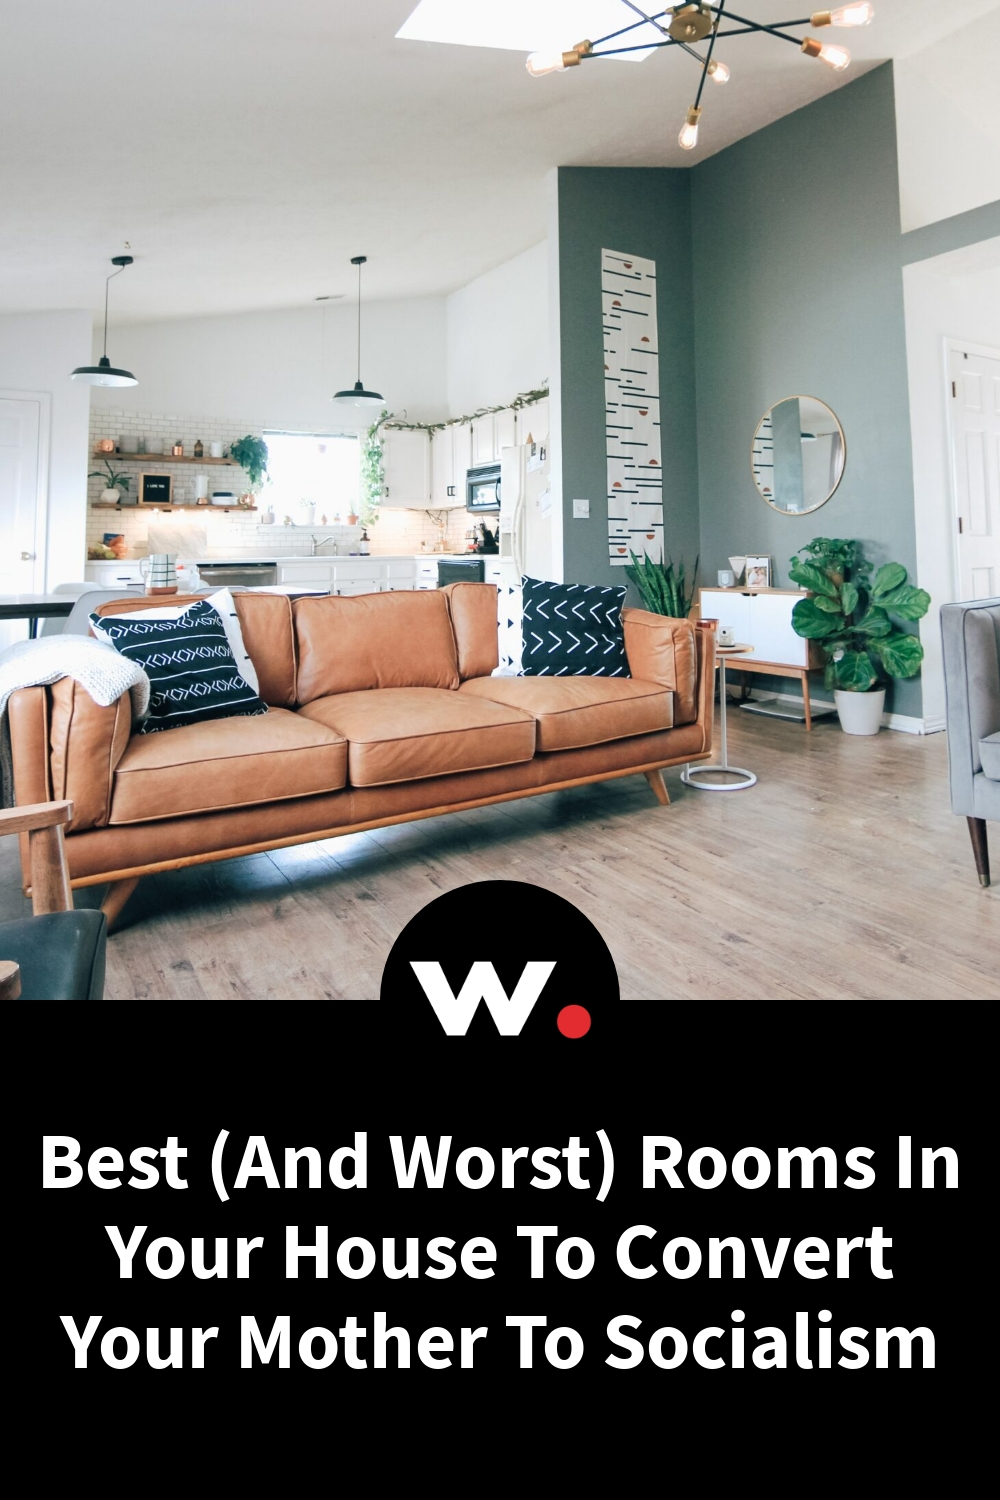 Best (And Worst) Rooms In Your House To Convert Your Mother To Socialism